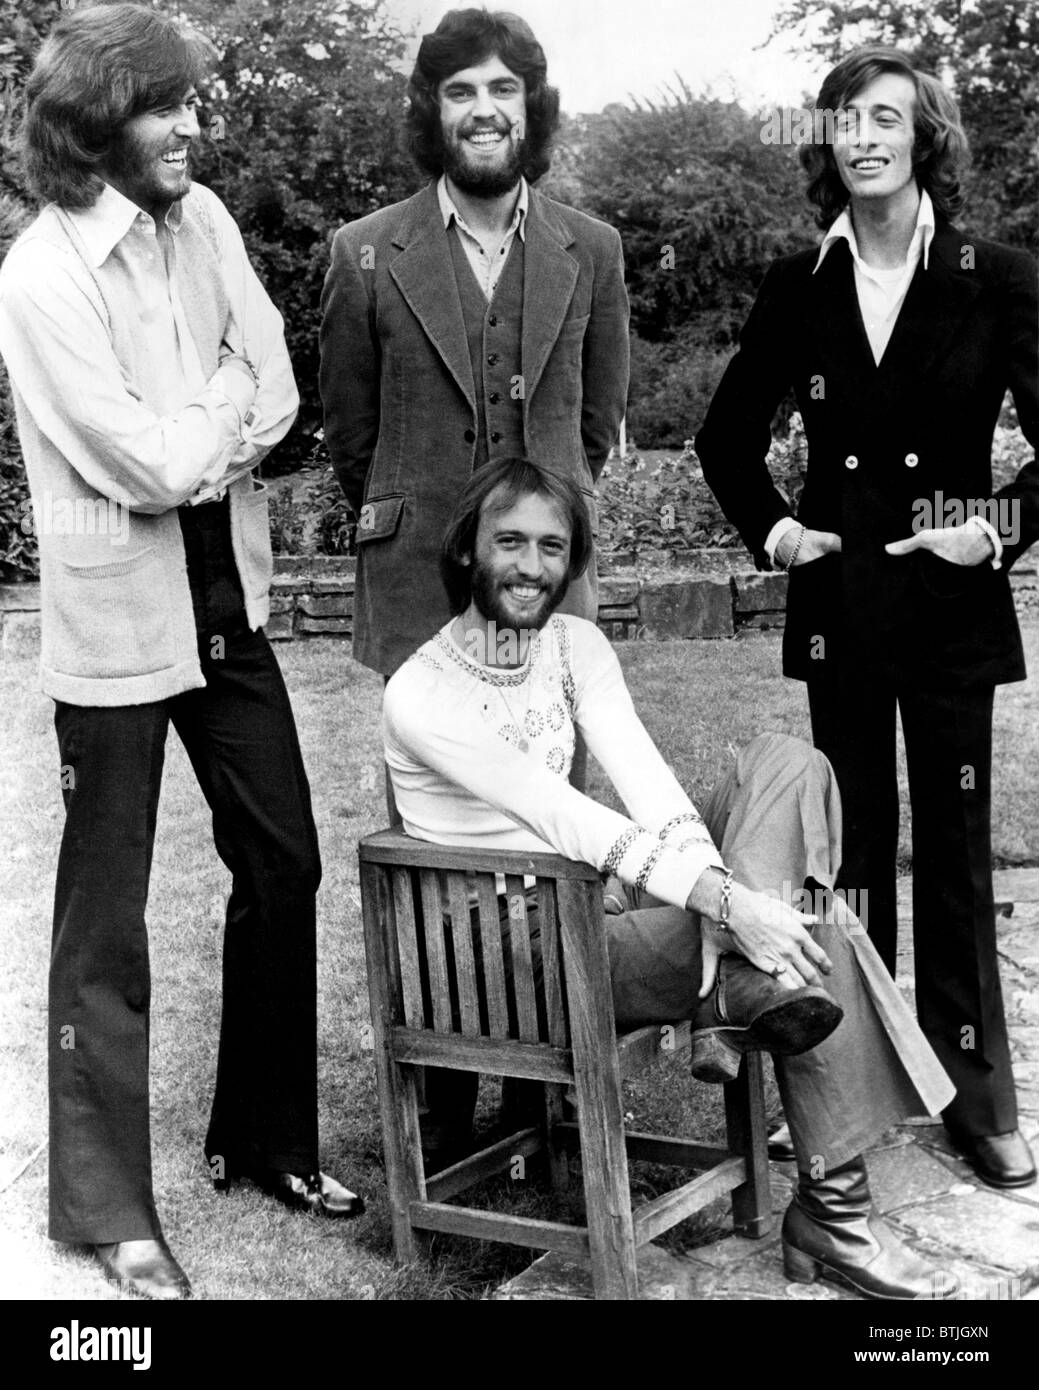 Bee Gees (stehend, l, R): Barry Gibb, Vince Melouney, Robin Gibb, (sitzend): Maurice Gibb, ca. Anfang der 1970er Jahre Stockfoto